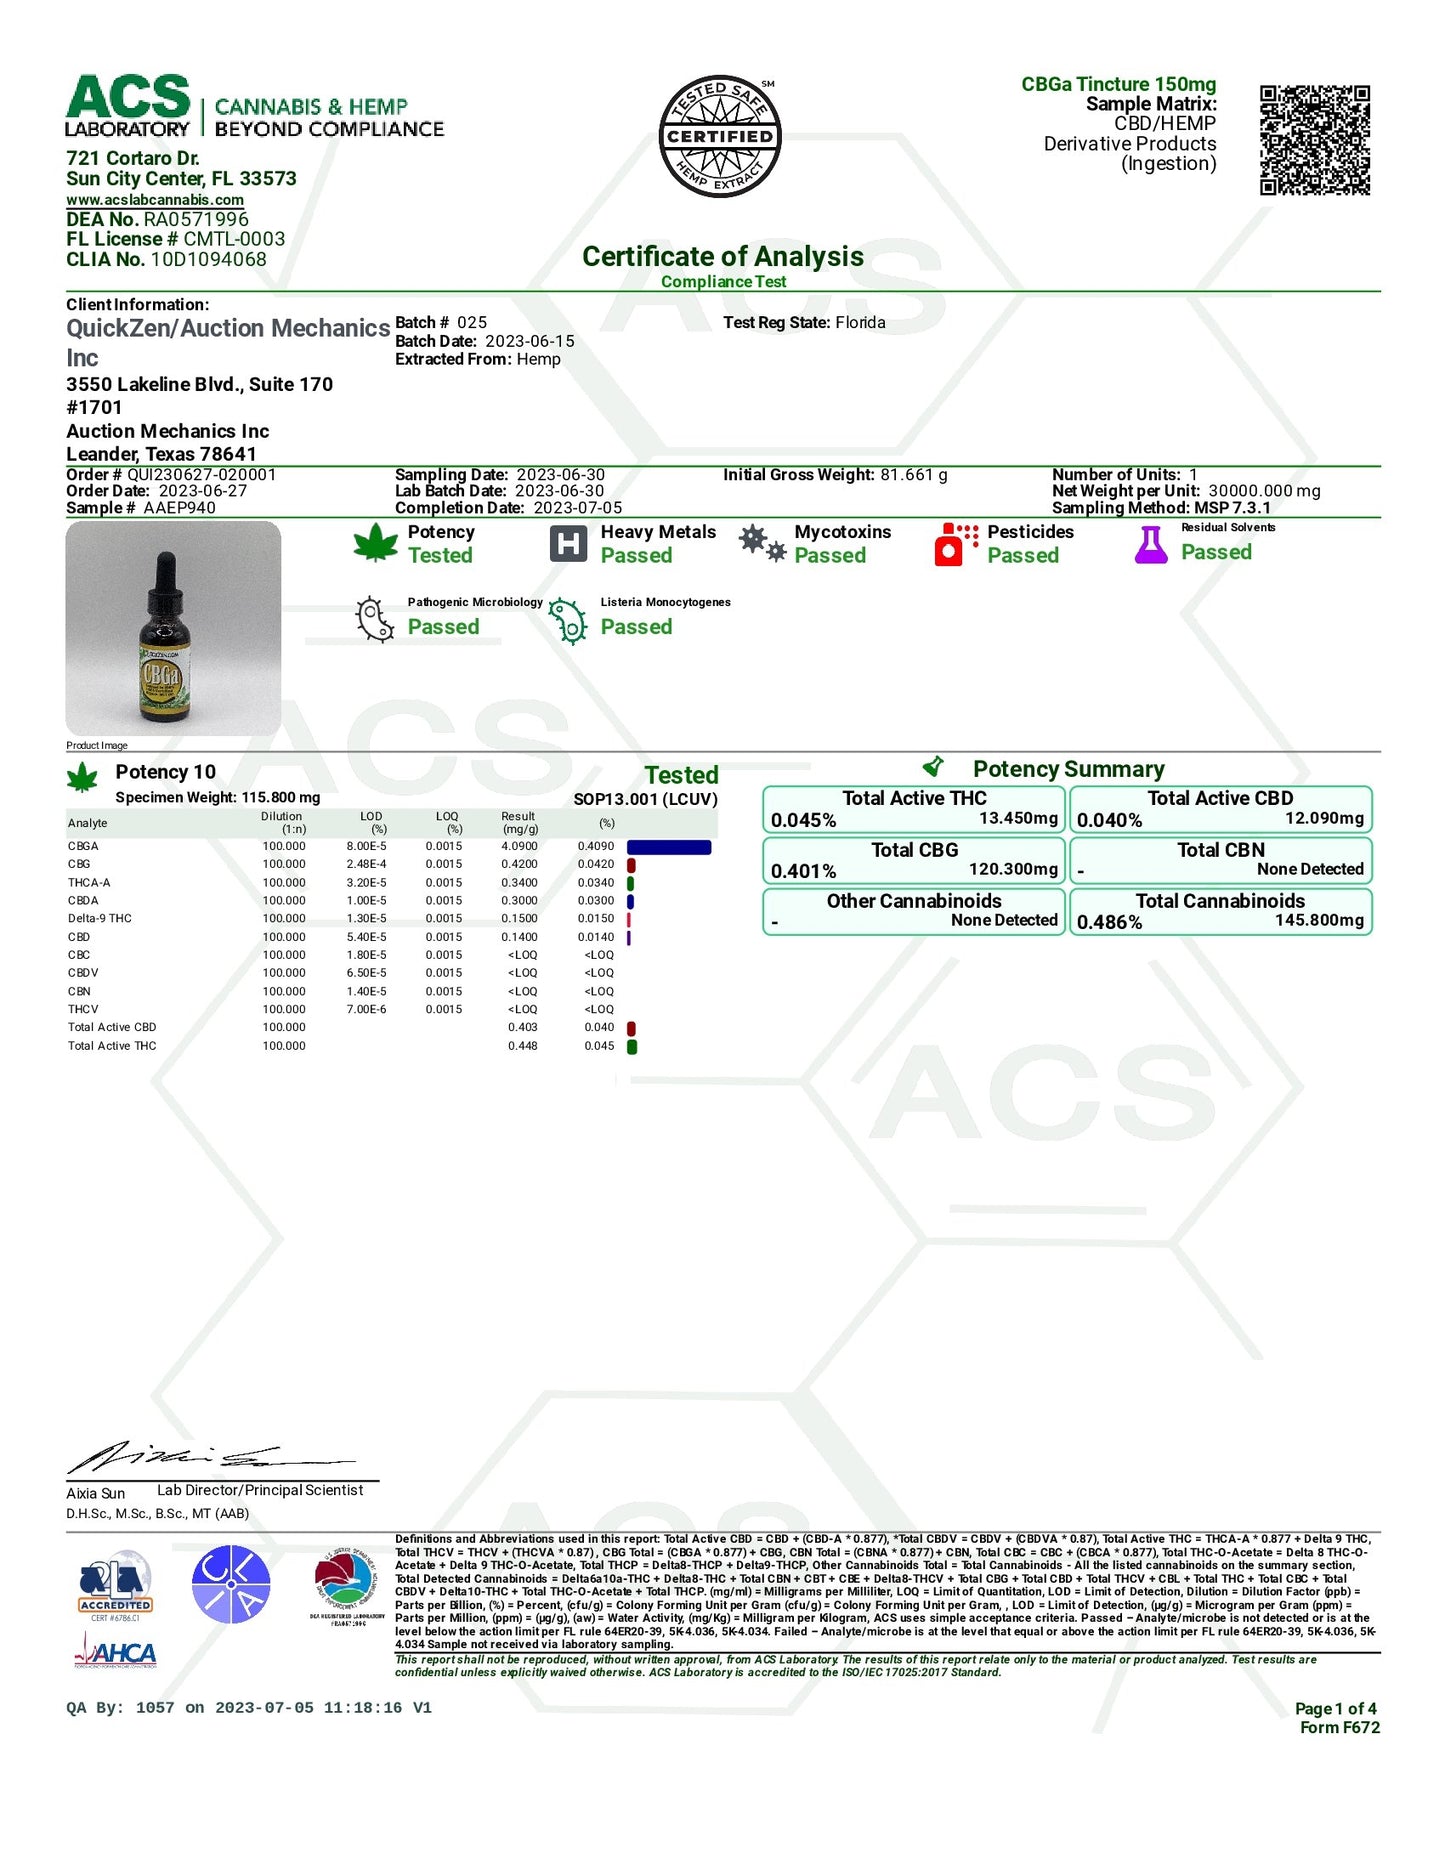 Lot 025 page one, cannabinoids profile analysis and full panel results summary. ACS Laboratories Certified Full Panel Tests.